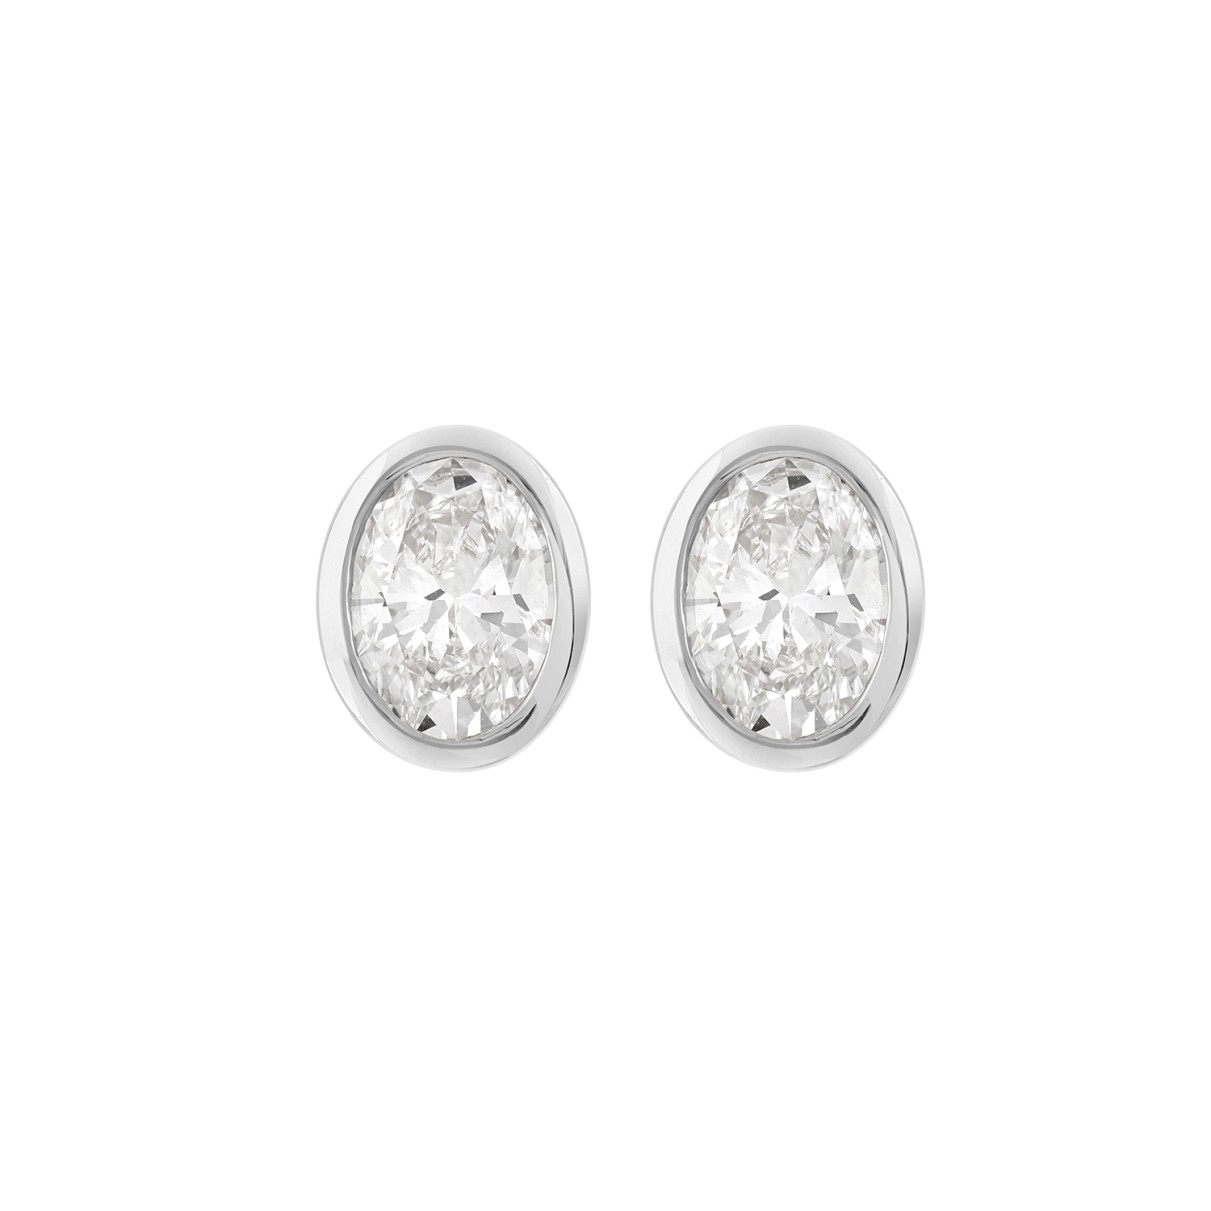 LADIES SOLITAIRE EARRING 1CT OVAL DIAMOND 14K WHIT...